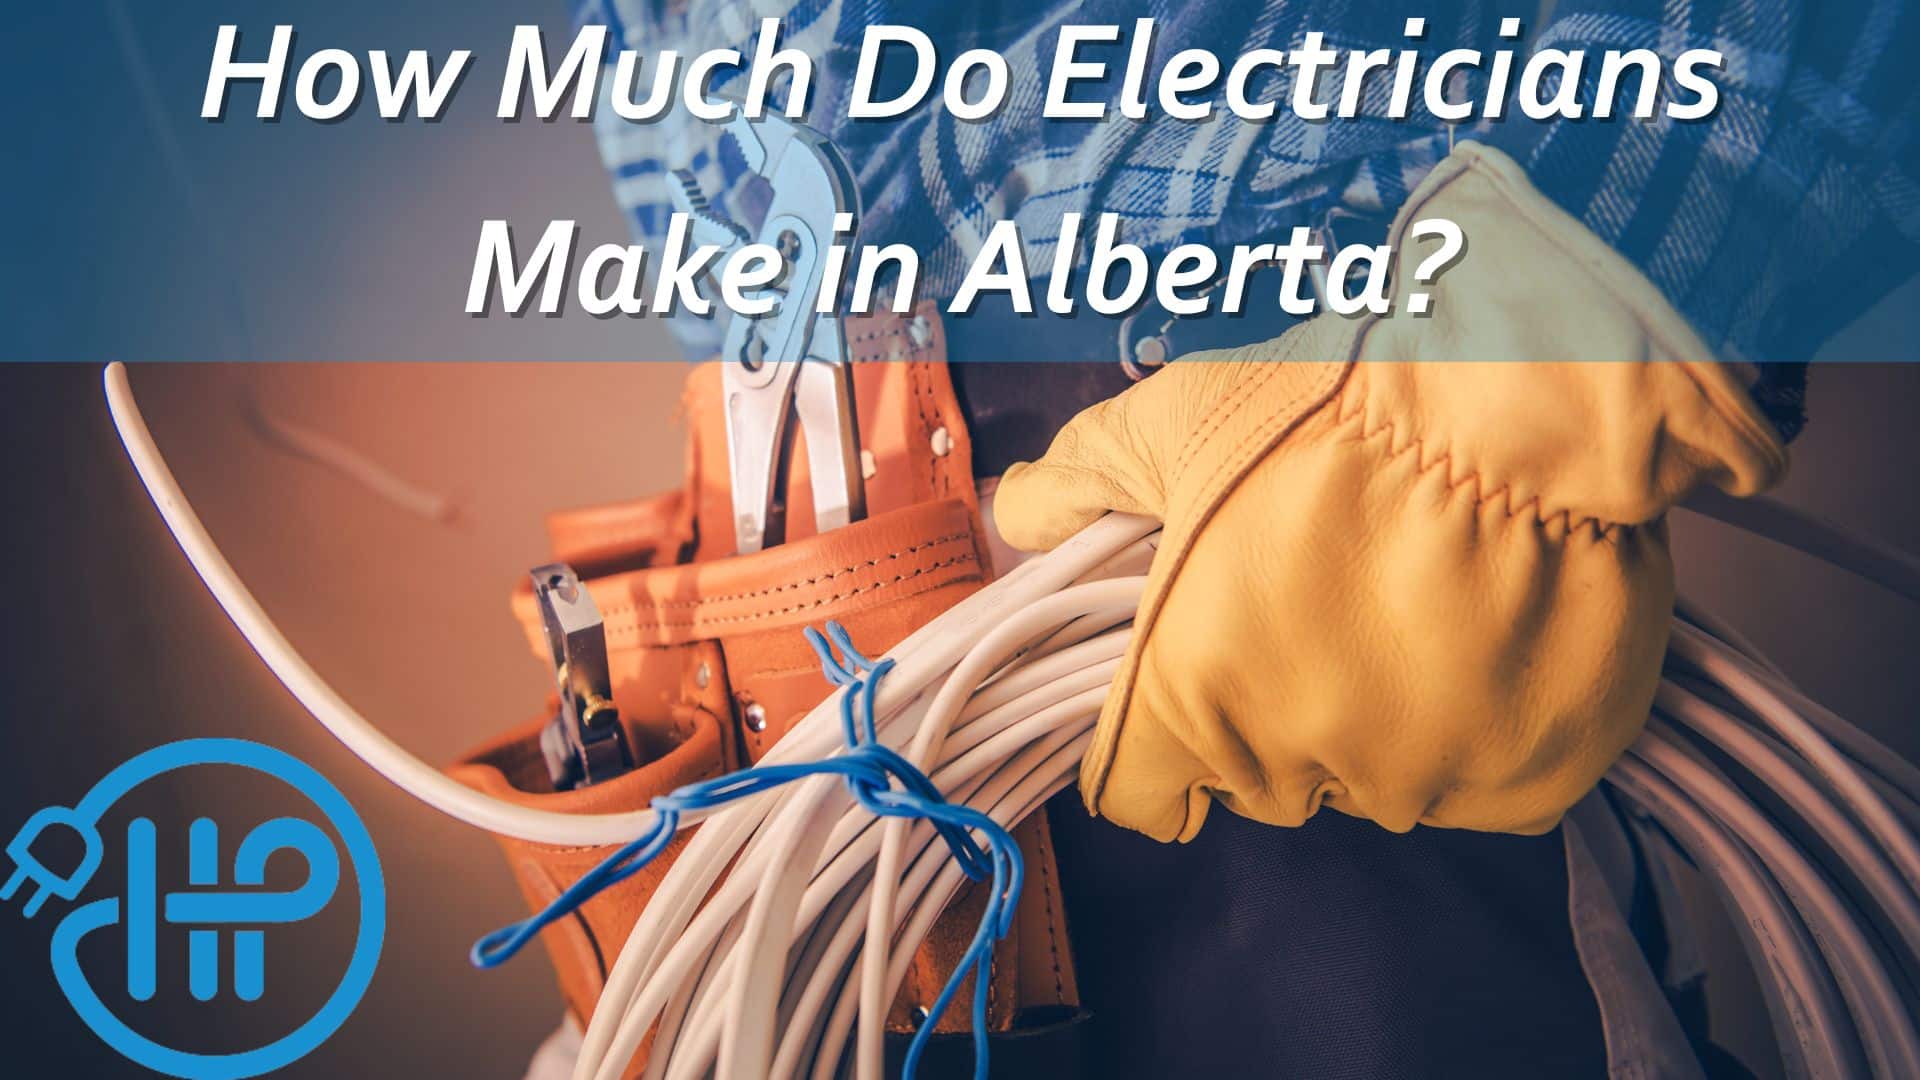 How Much Do Electricians Make in Alberta